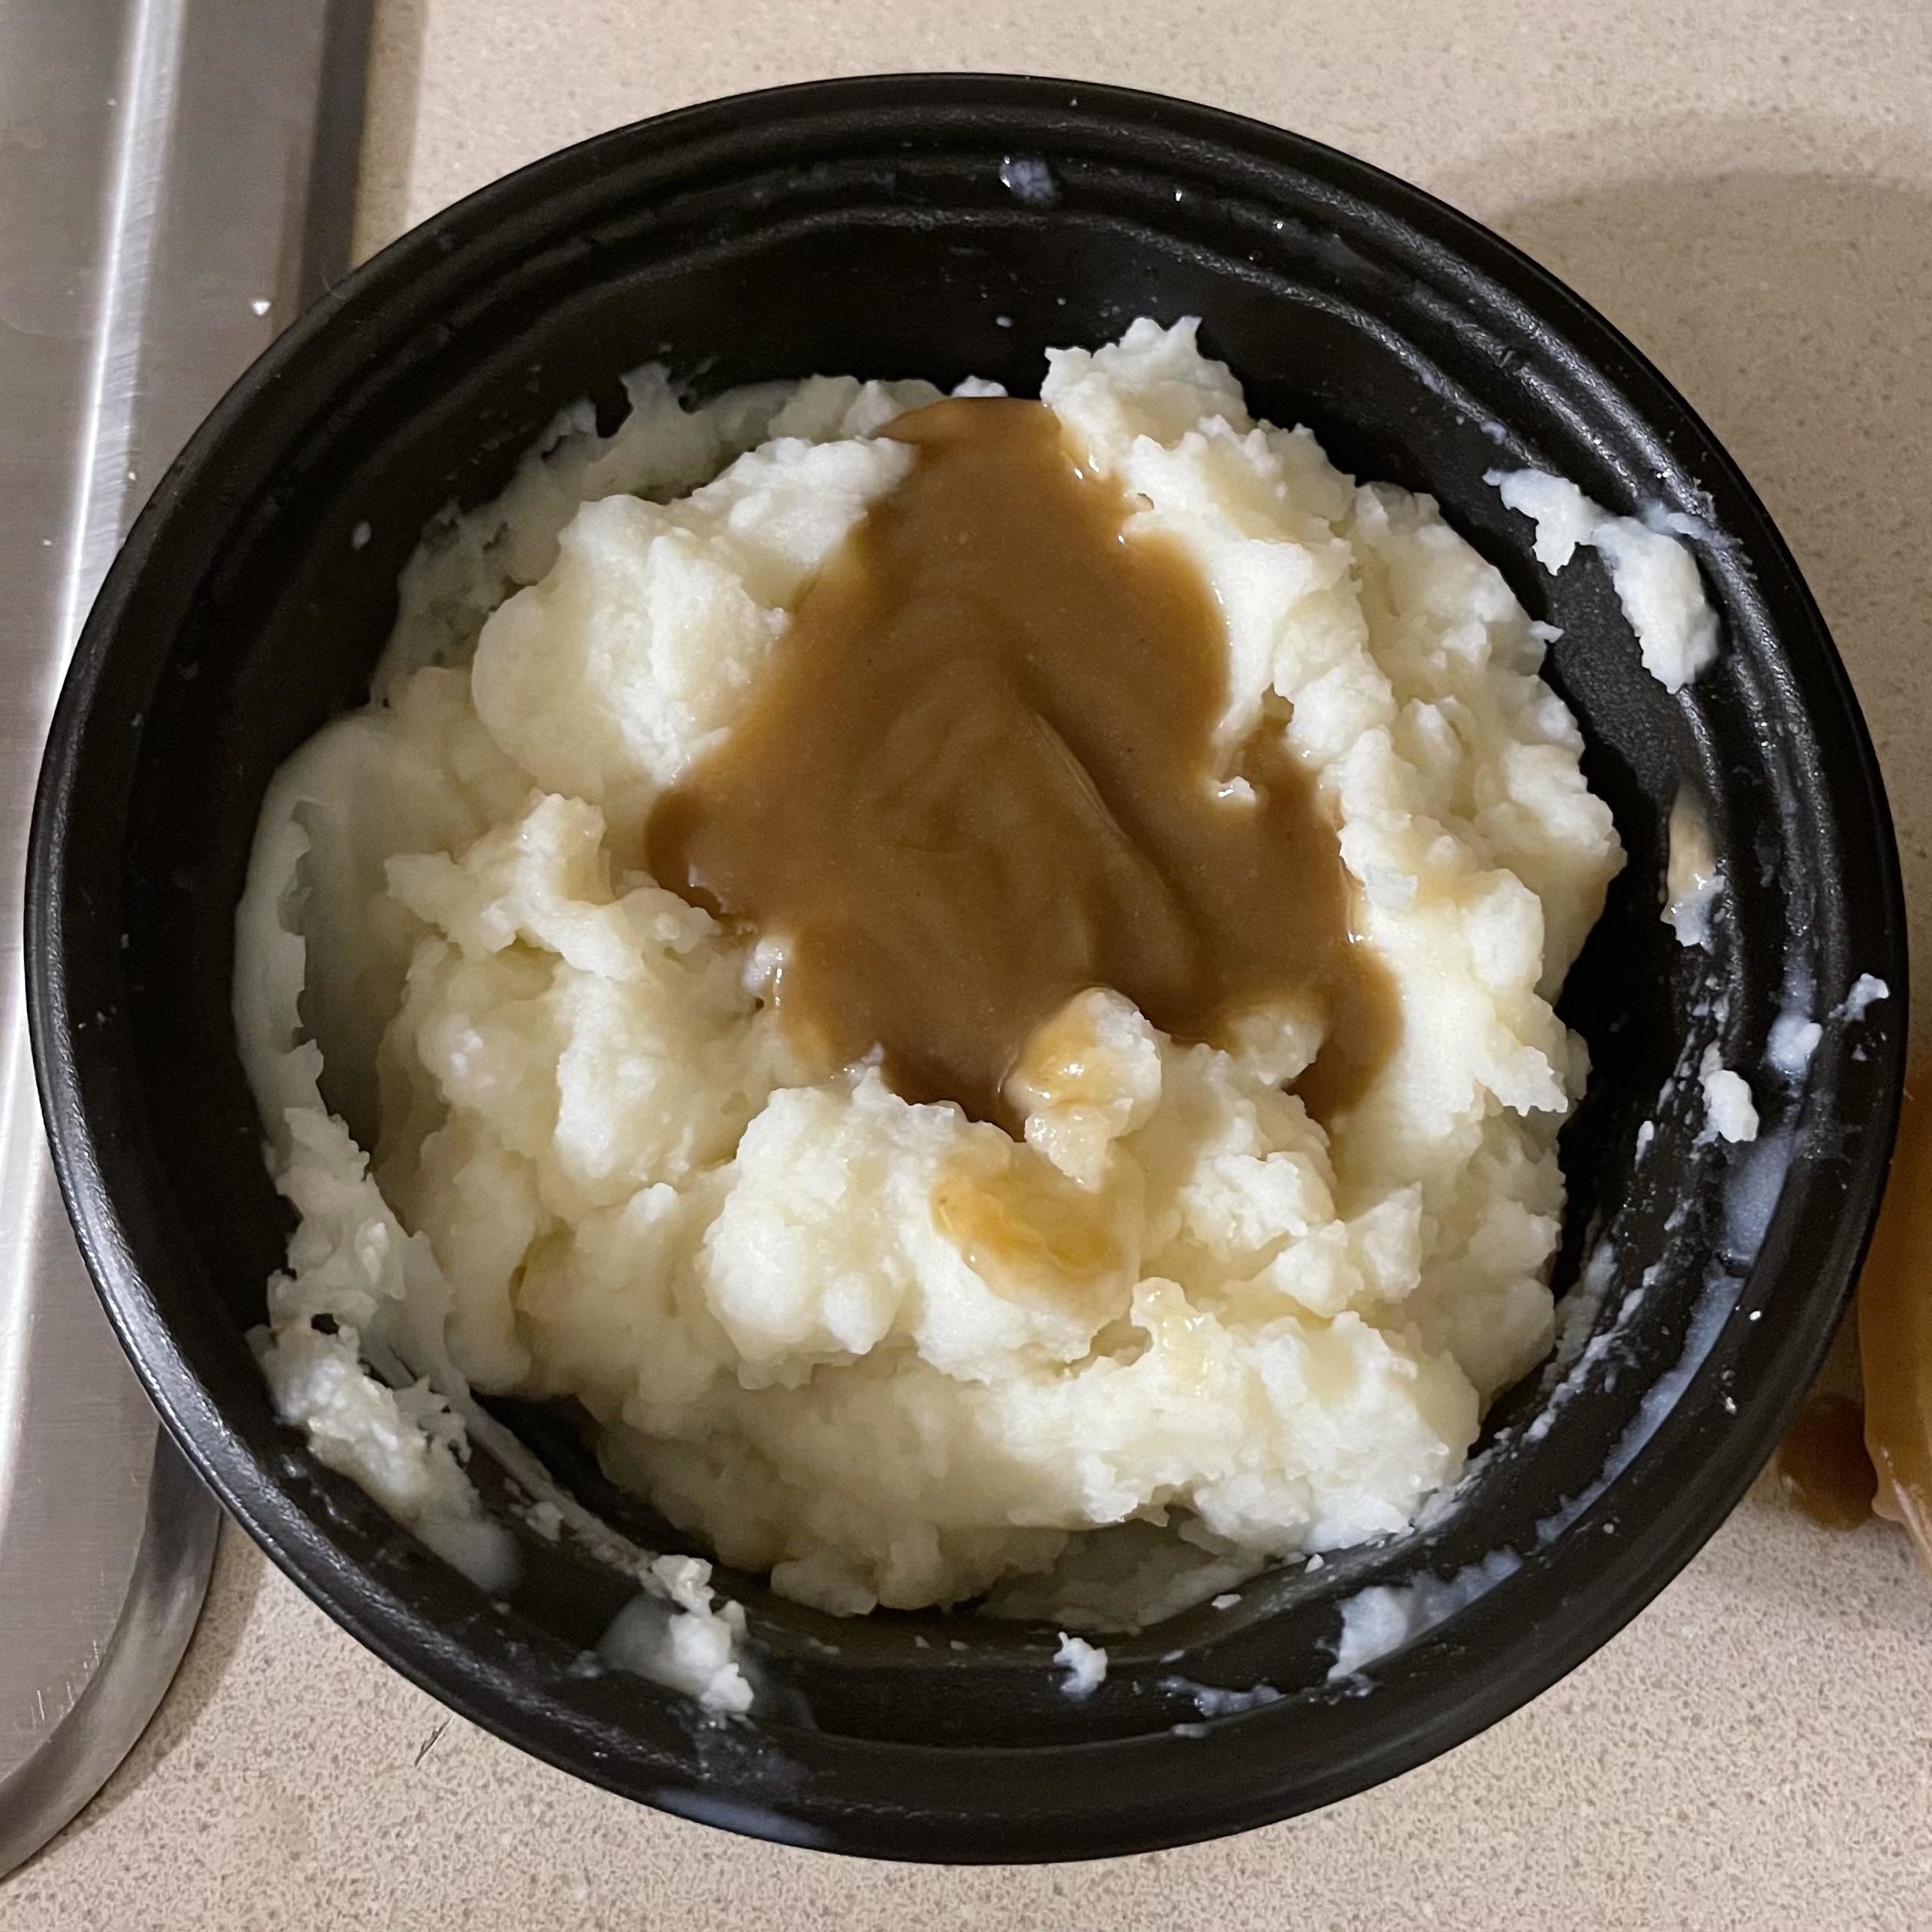 mashed potatoes in a black plastic bowl topped with gravy